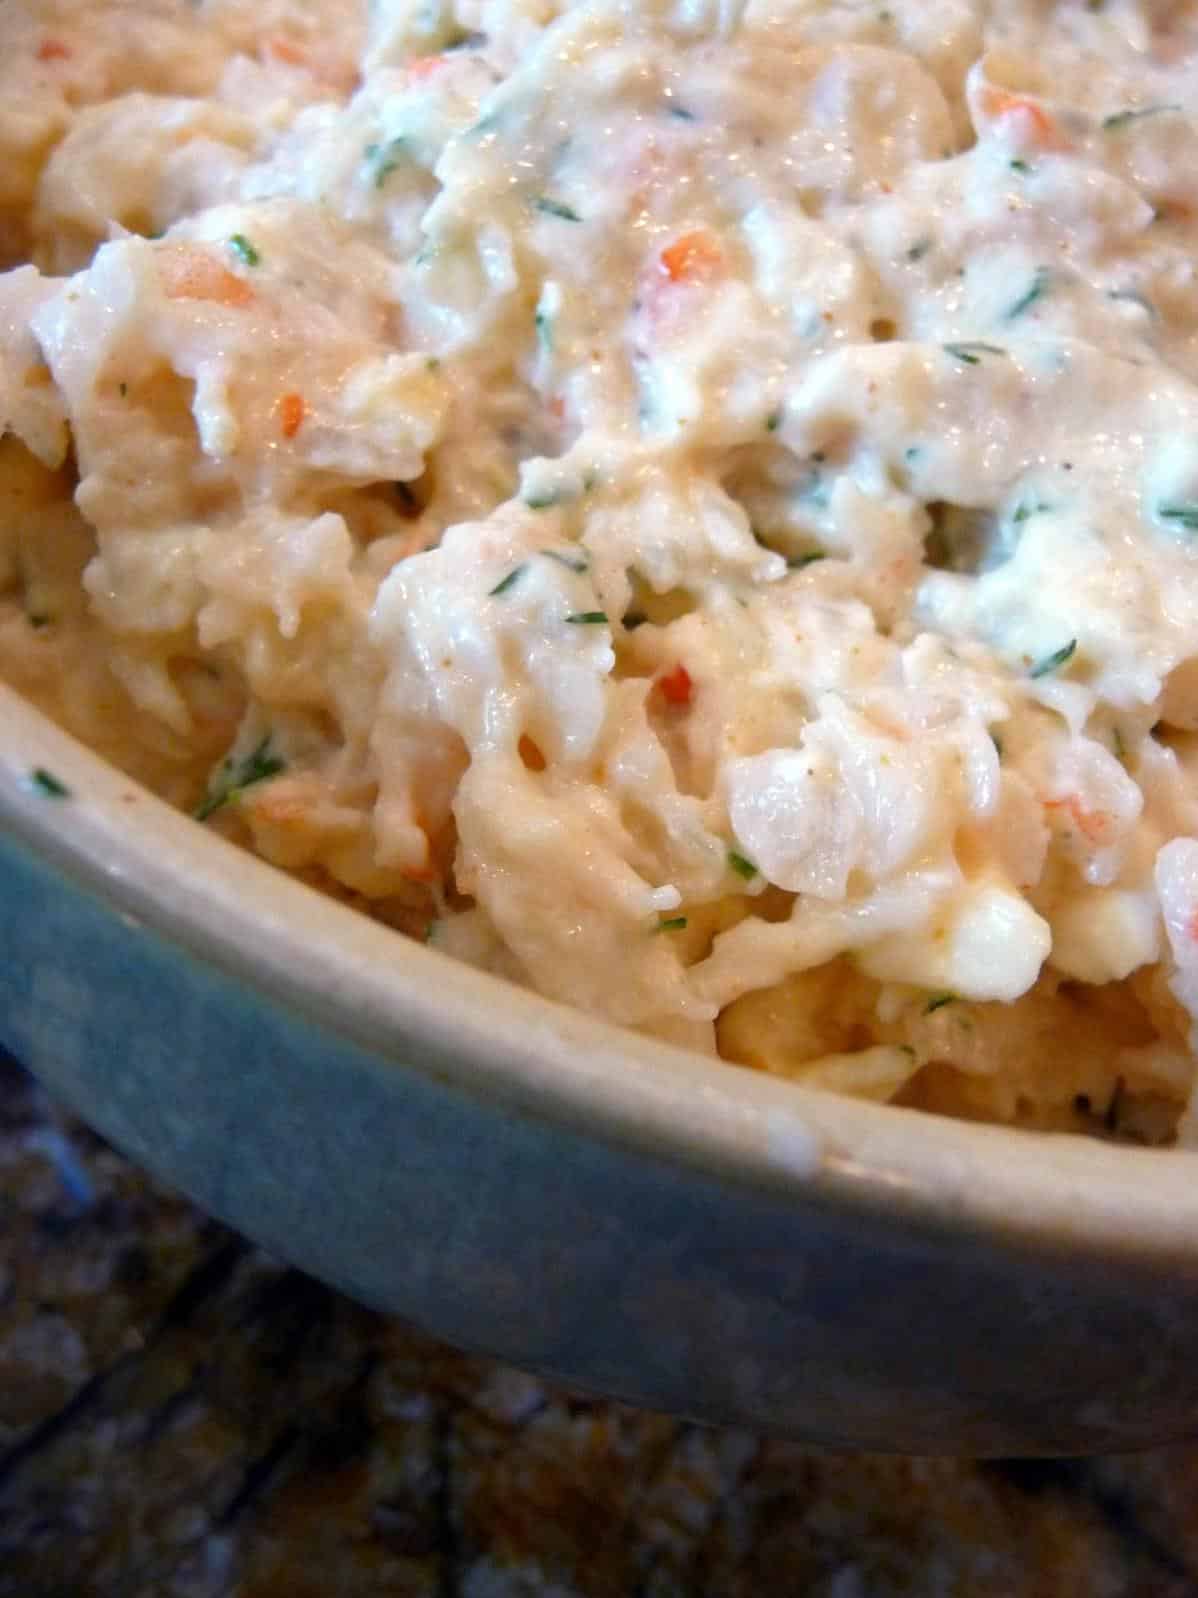  Cream cheese, shrimp, and herbs blend perfectly to create this amazing dish.